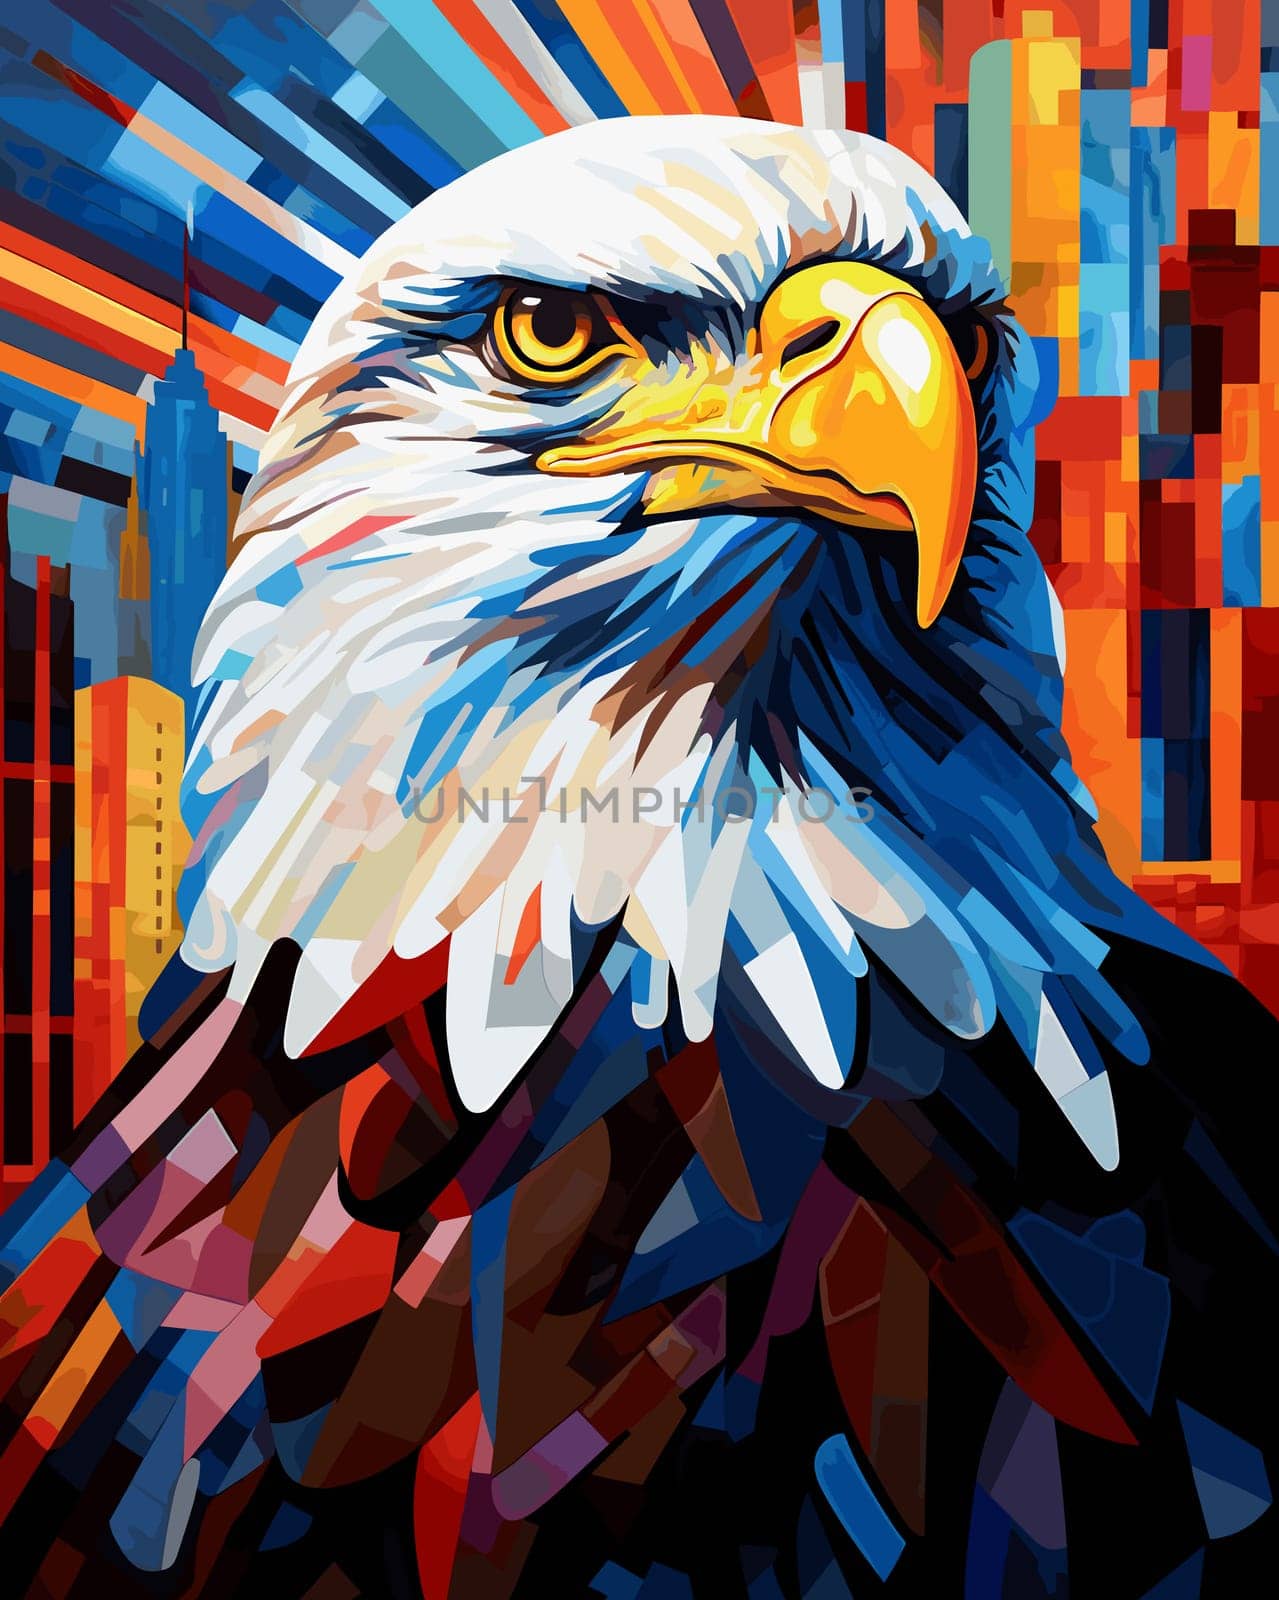 American bald eagle against the backdrop of a metropolis. Illustration in vector pop art style. Template for a poster, t-shirt print, sticker, etc.